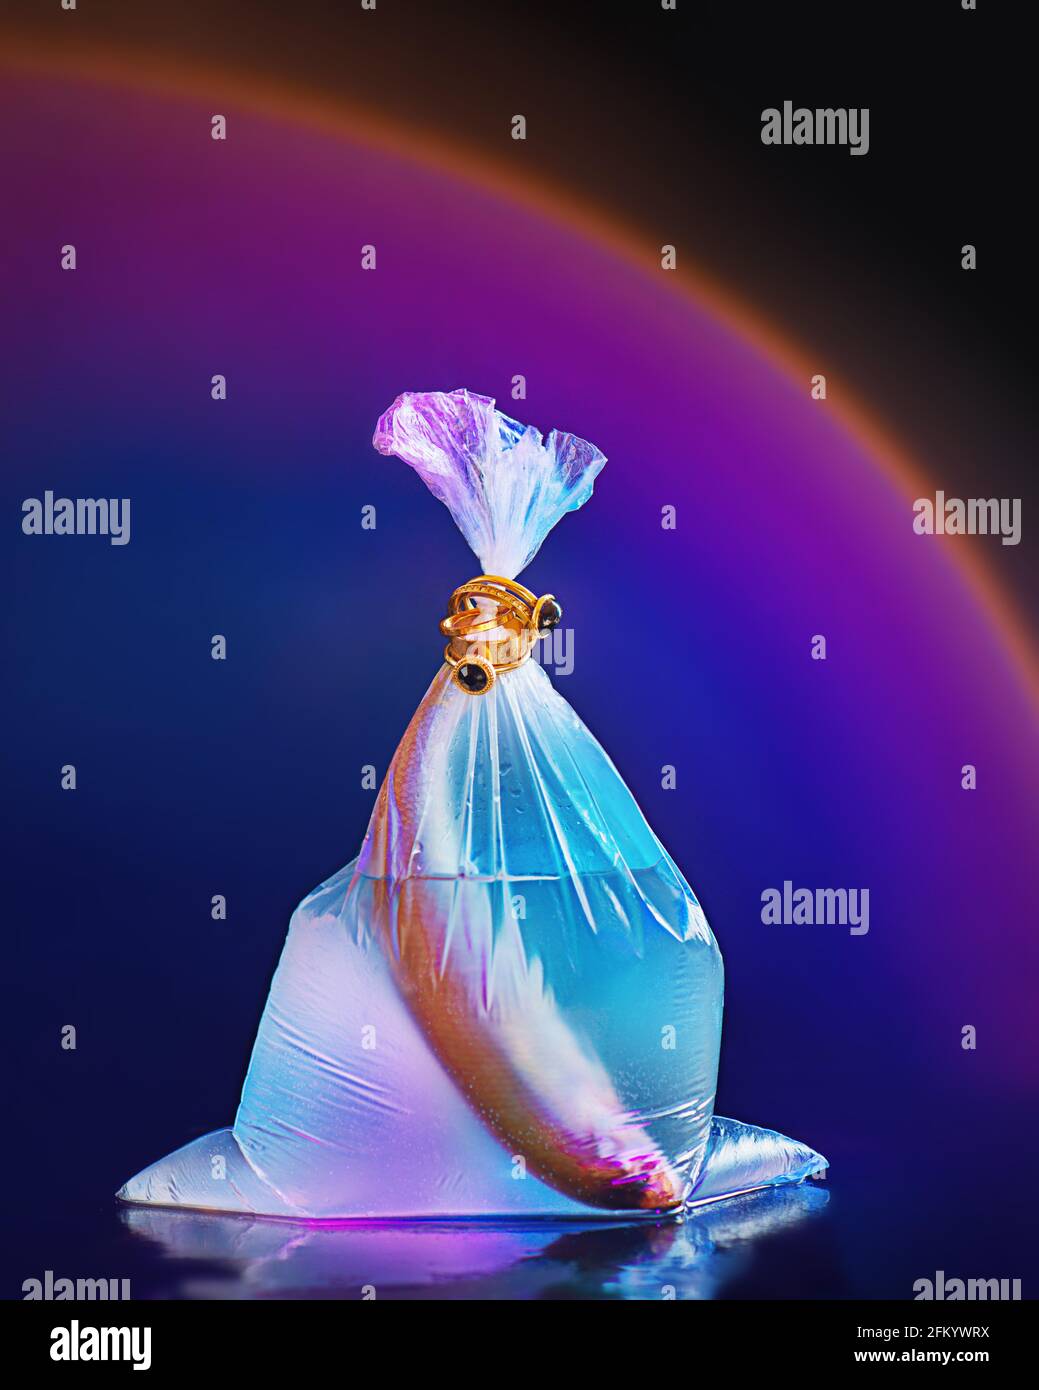 Fish in a plastic bag with jewelry, creative fashion photography, golden rings, purple light Stock Photo